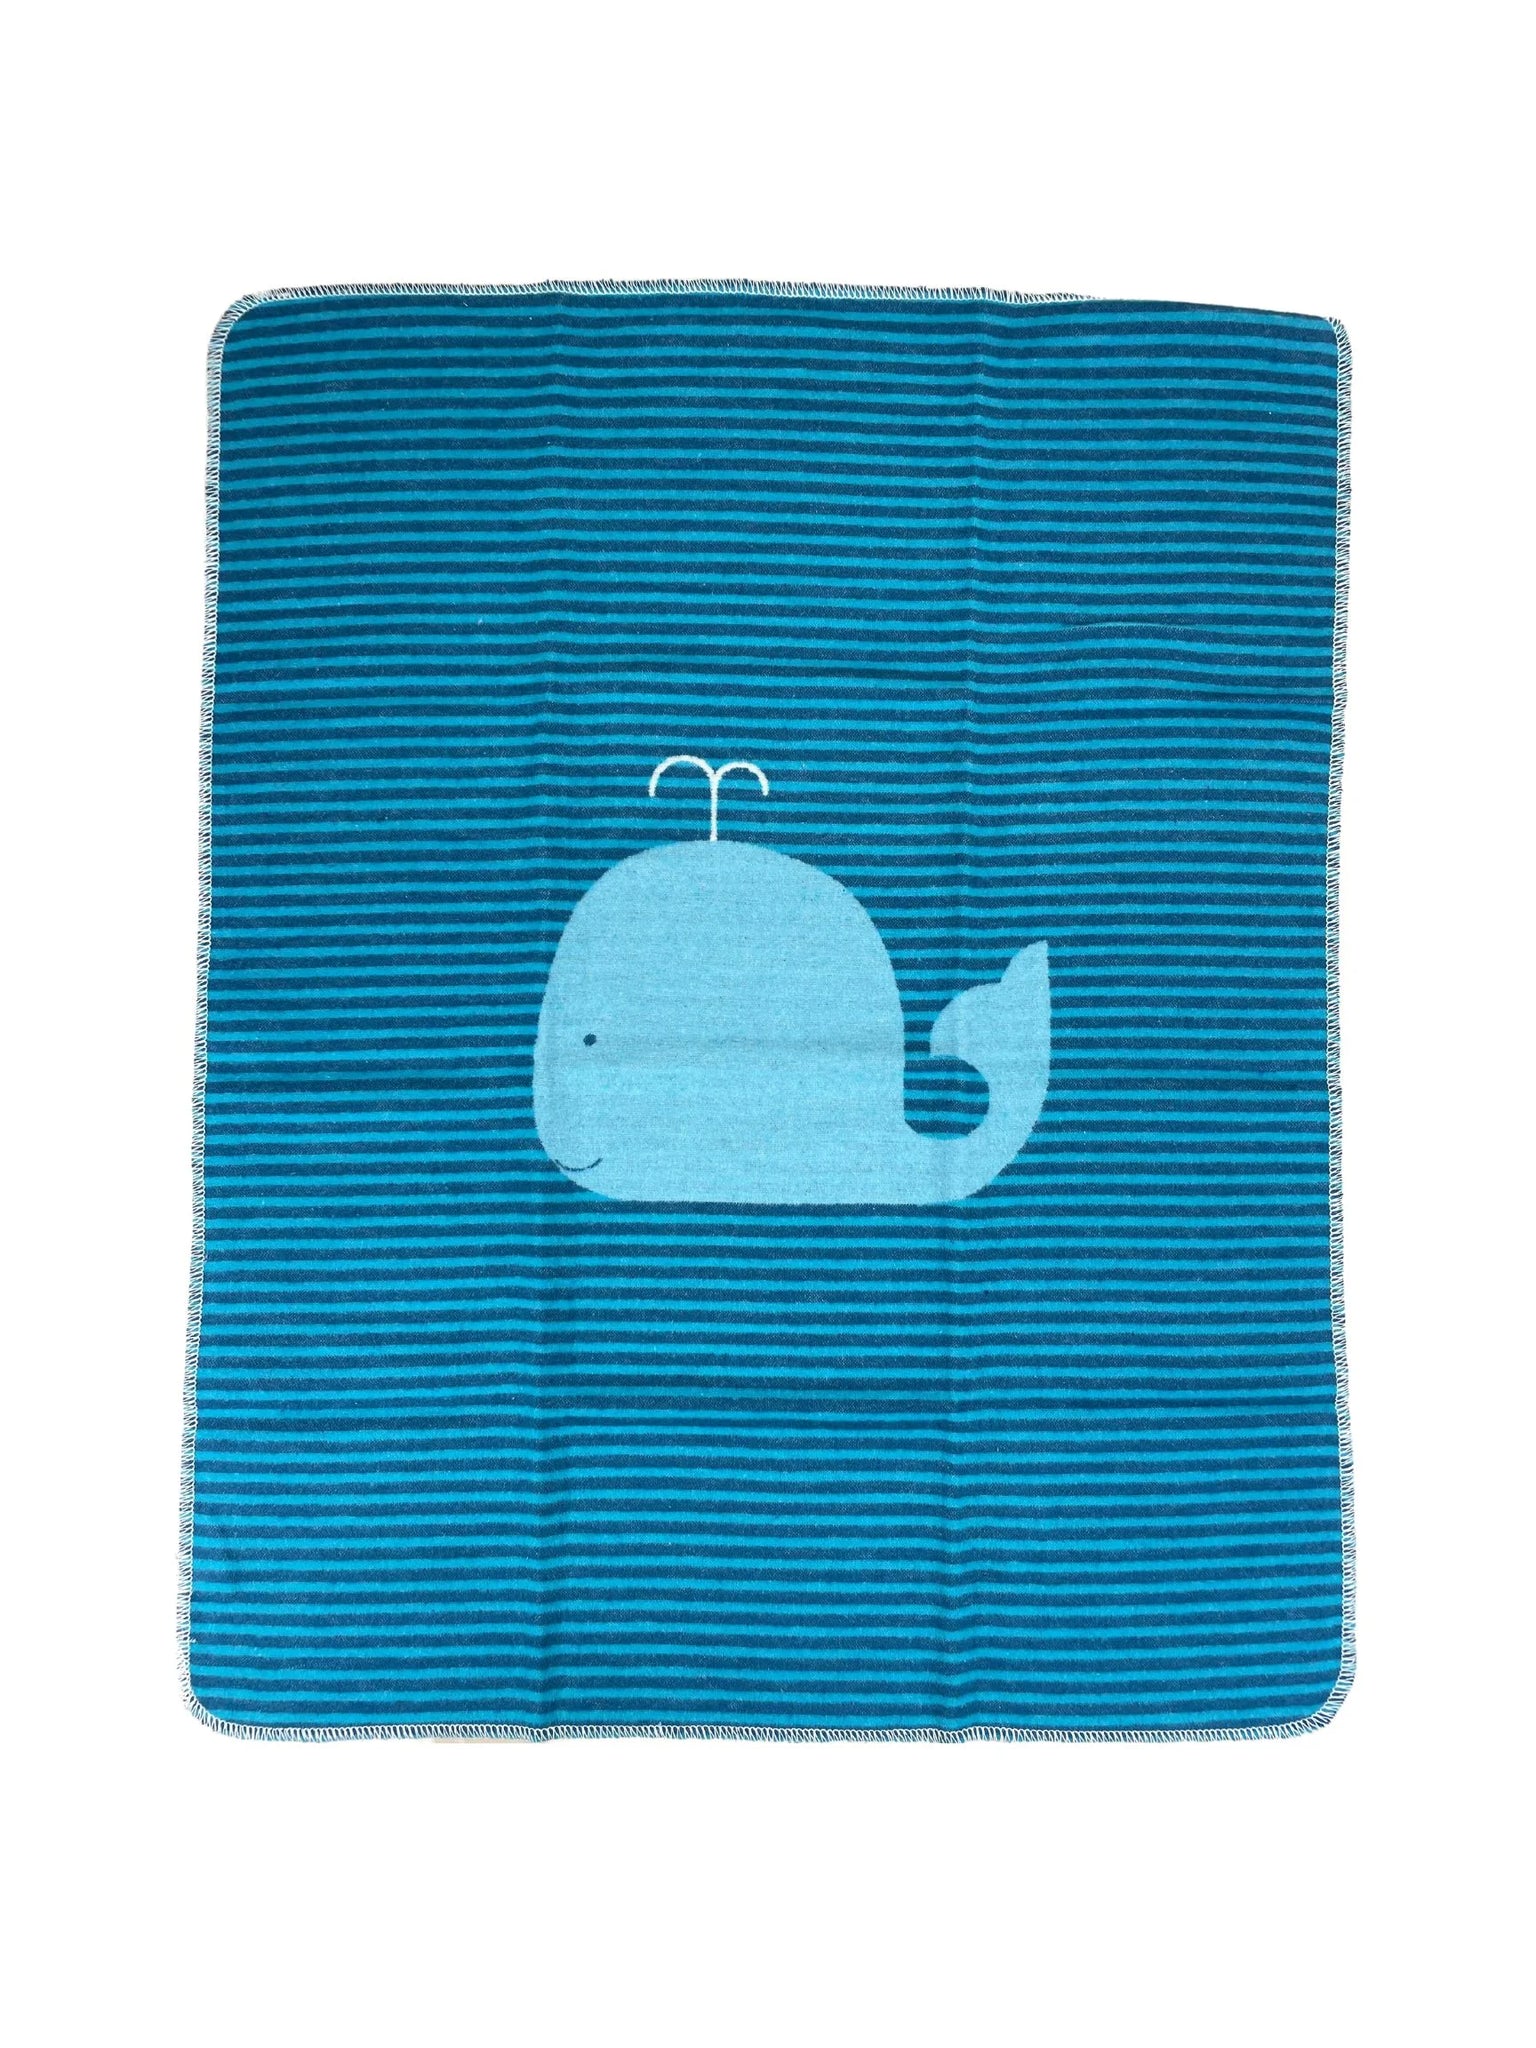 blue striped blanket with whale